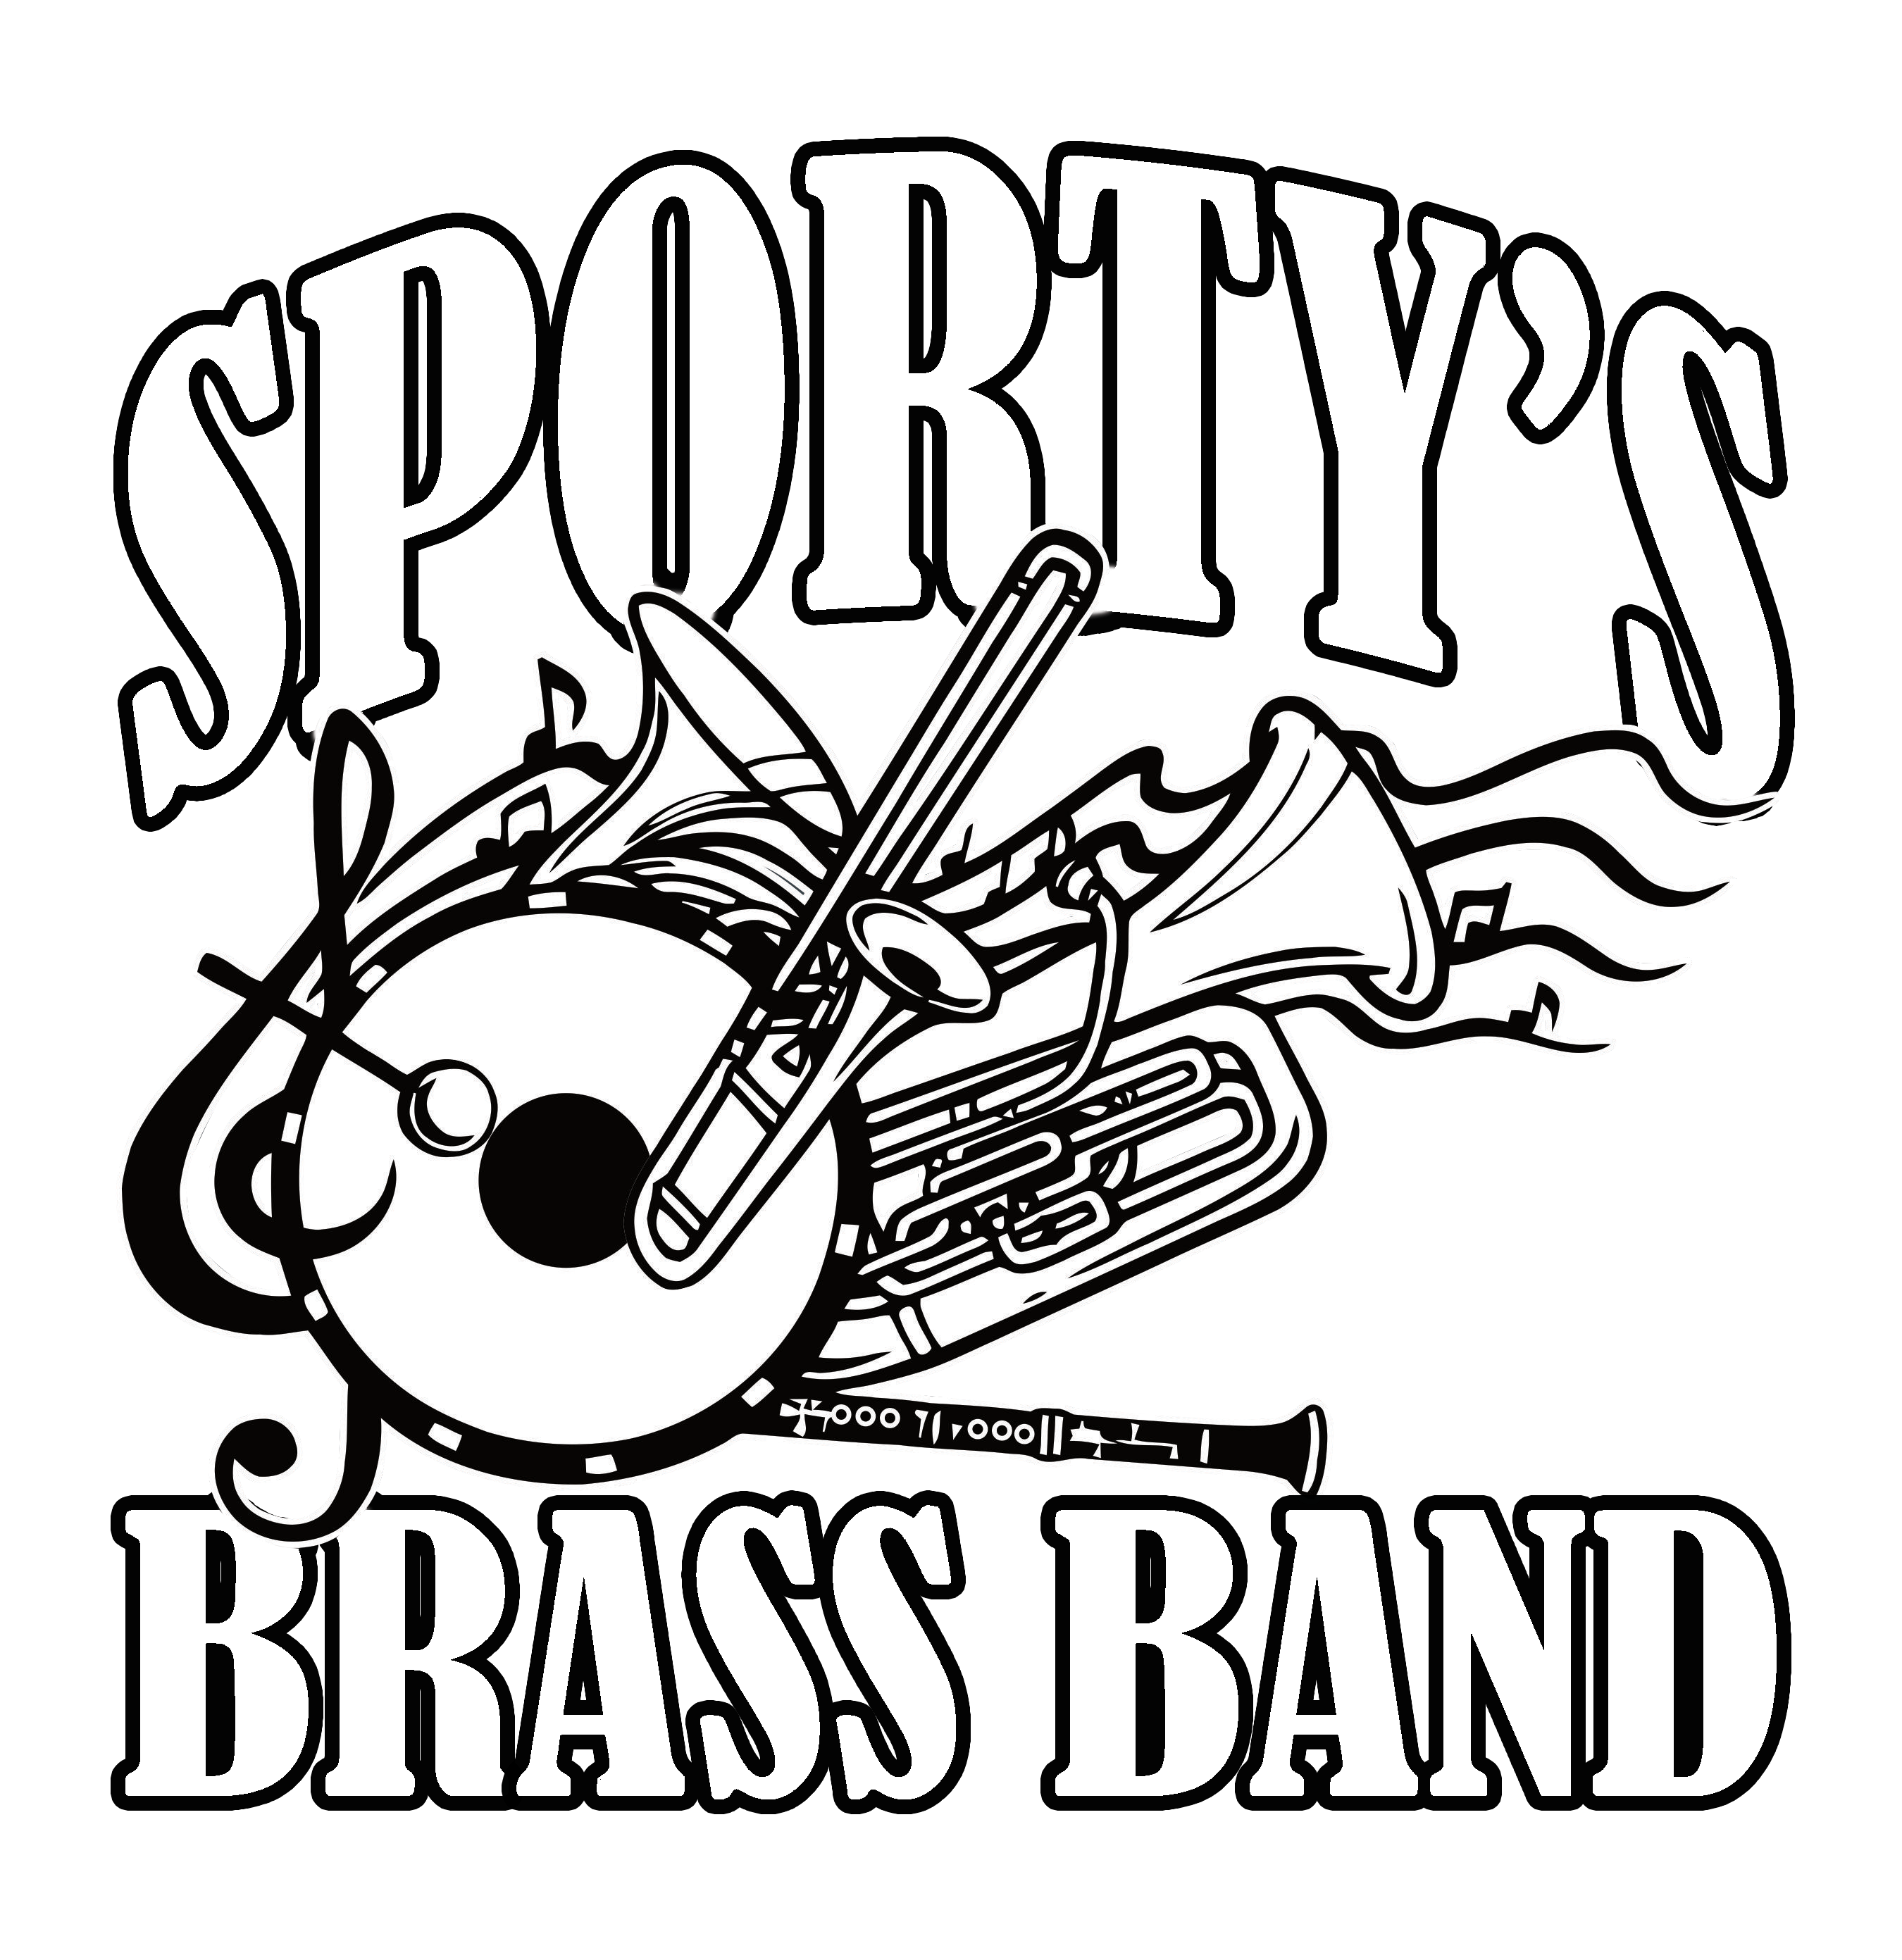 Sporty's Brass Band